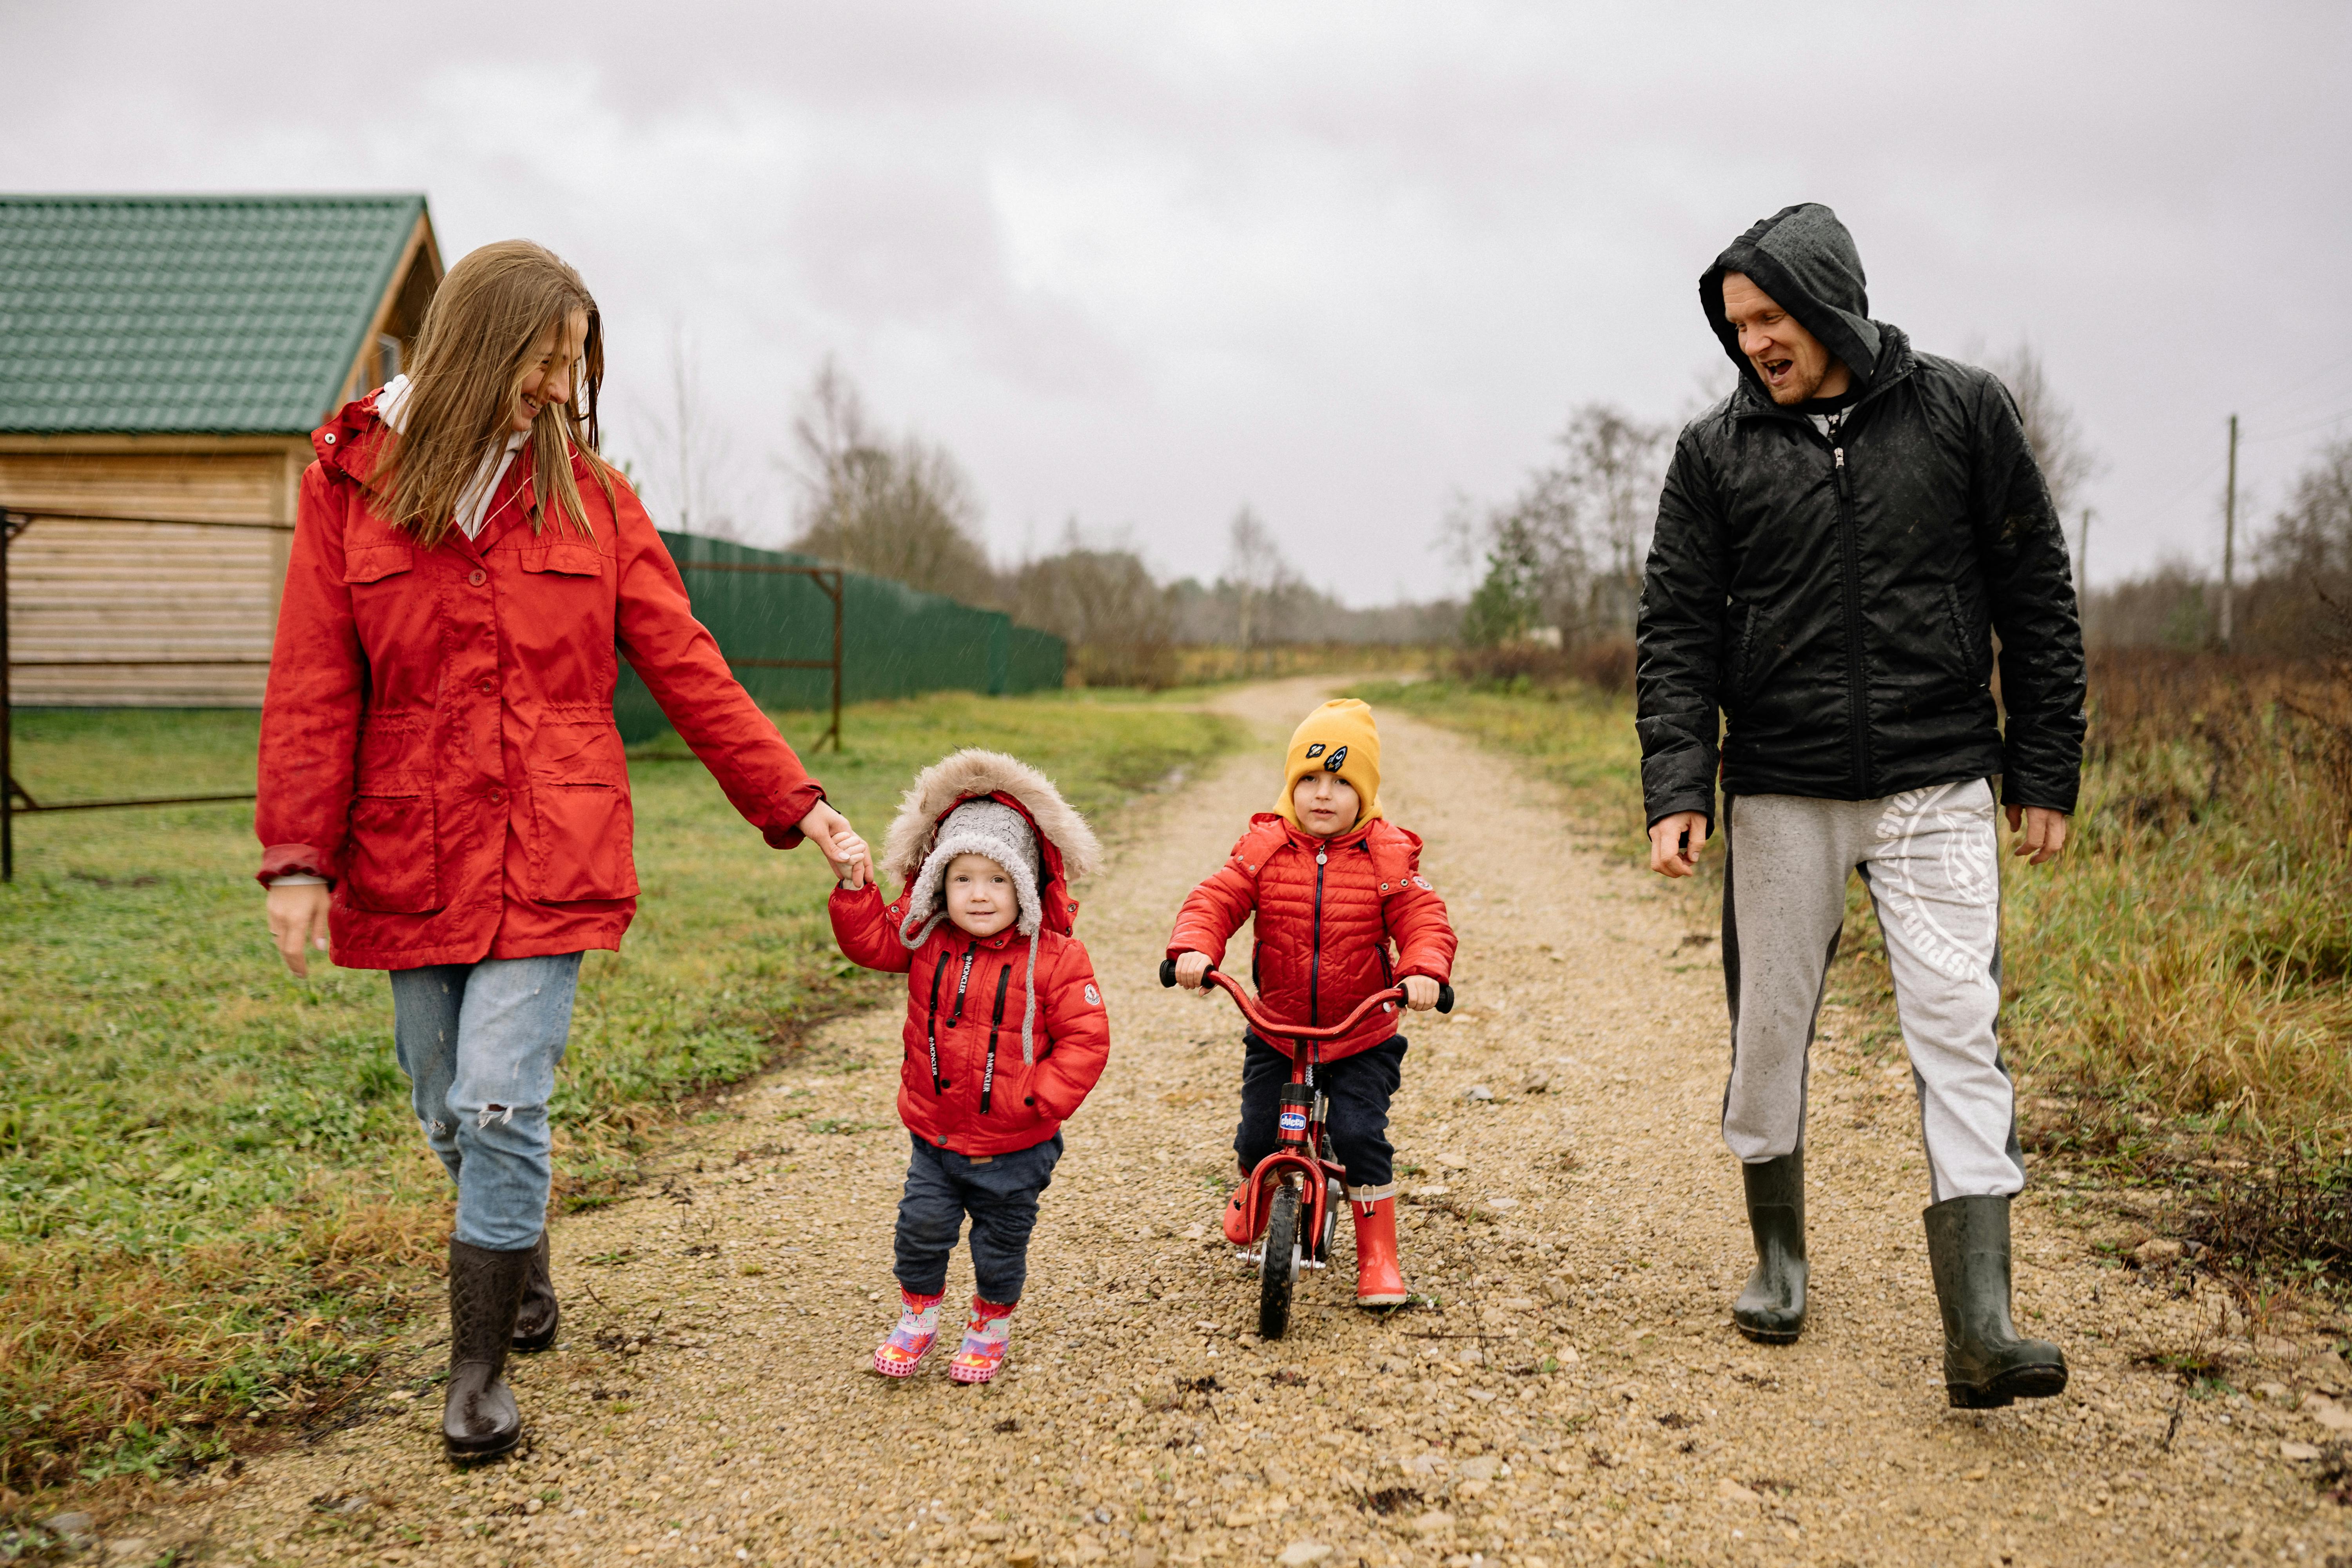 A family playing outdoors | Source: Pexels